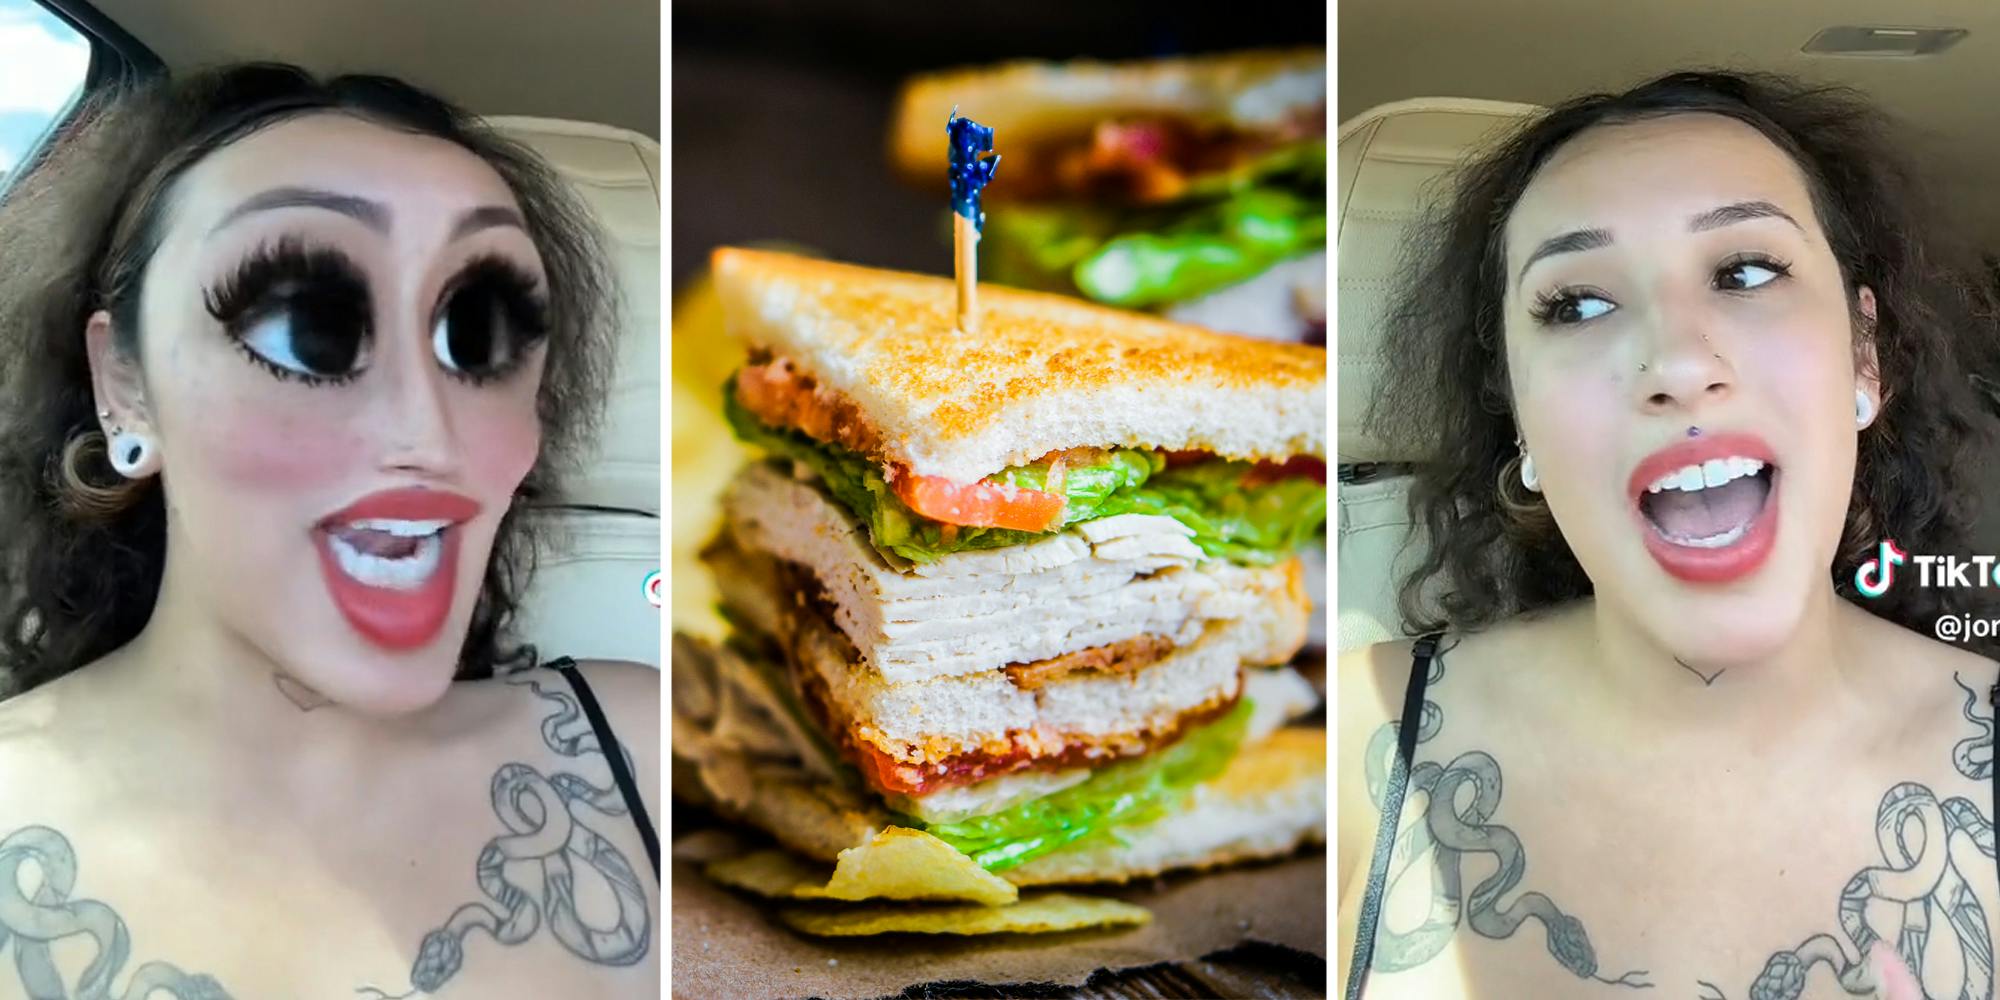 Woman talking with filter on(l), Sandwich(c), Woman talking without filter(r)